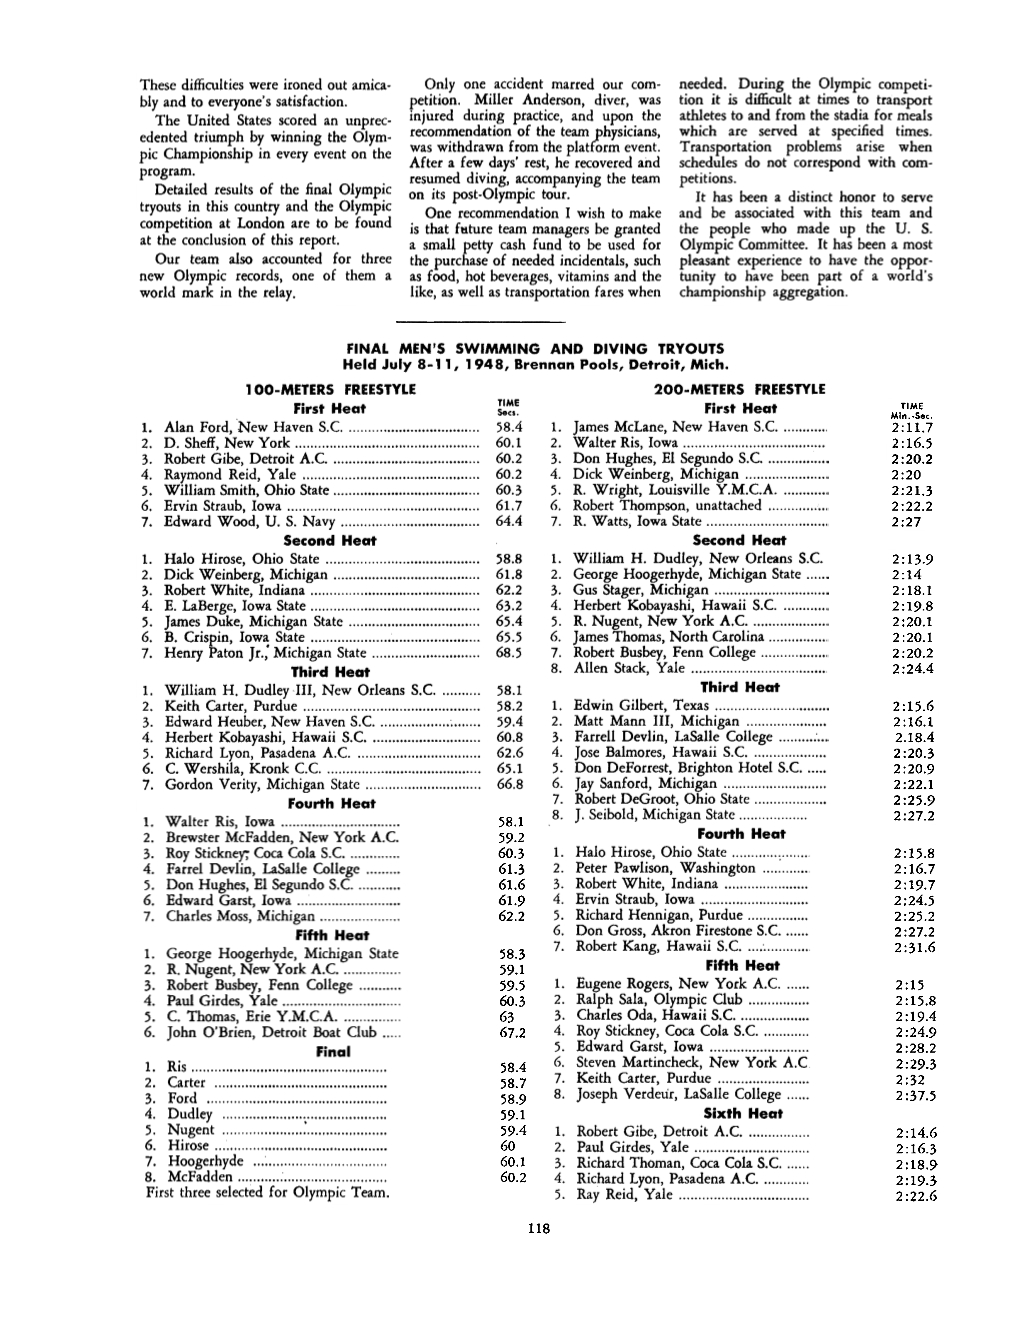 1948 Olympic Trials Results